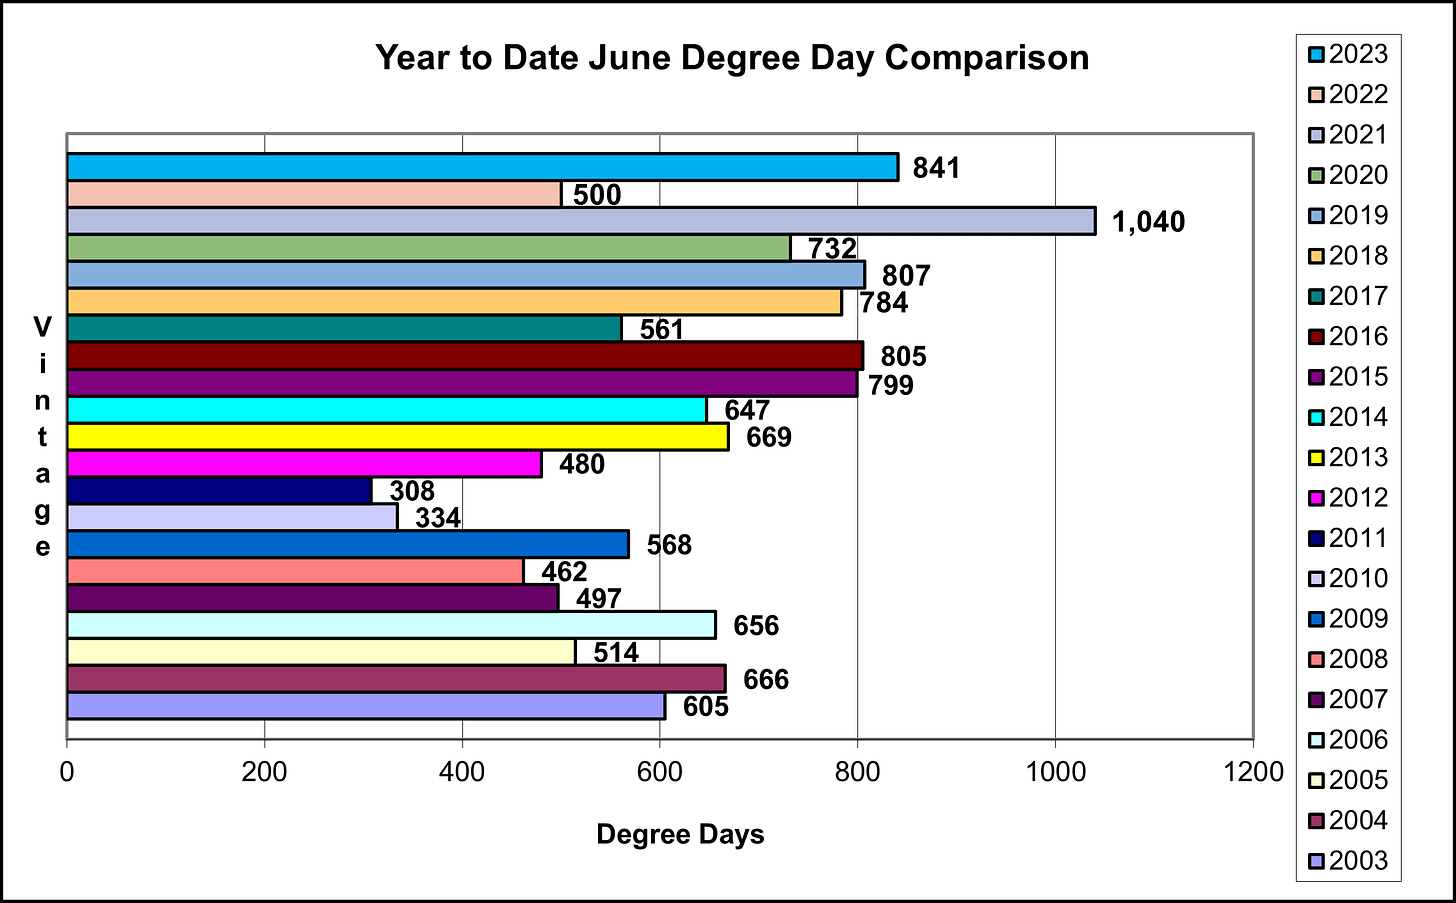 Year to date June Degree Day comparison.